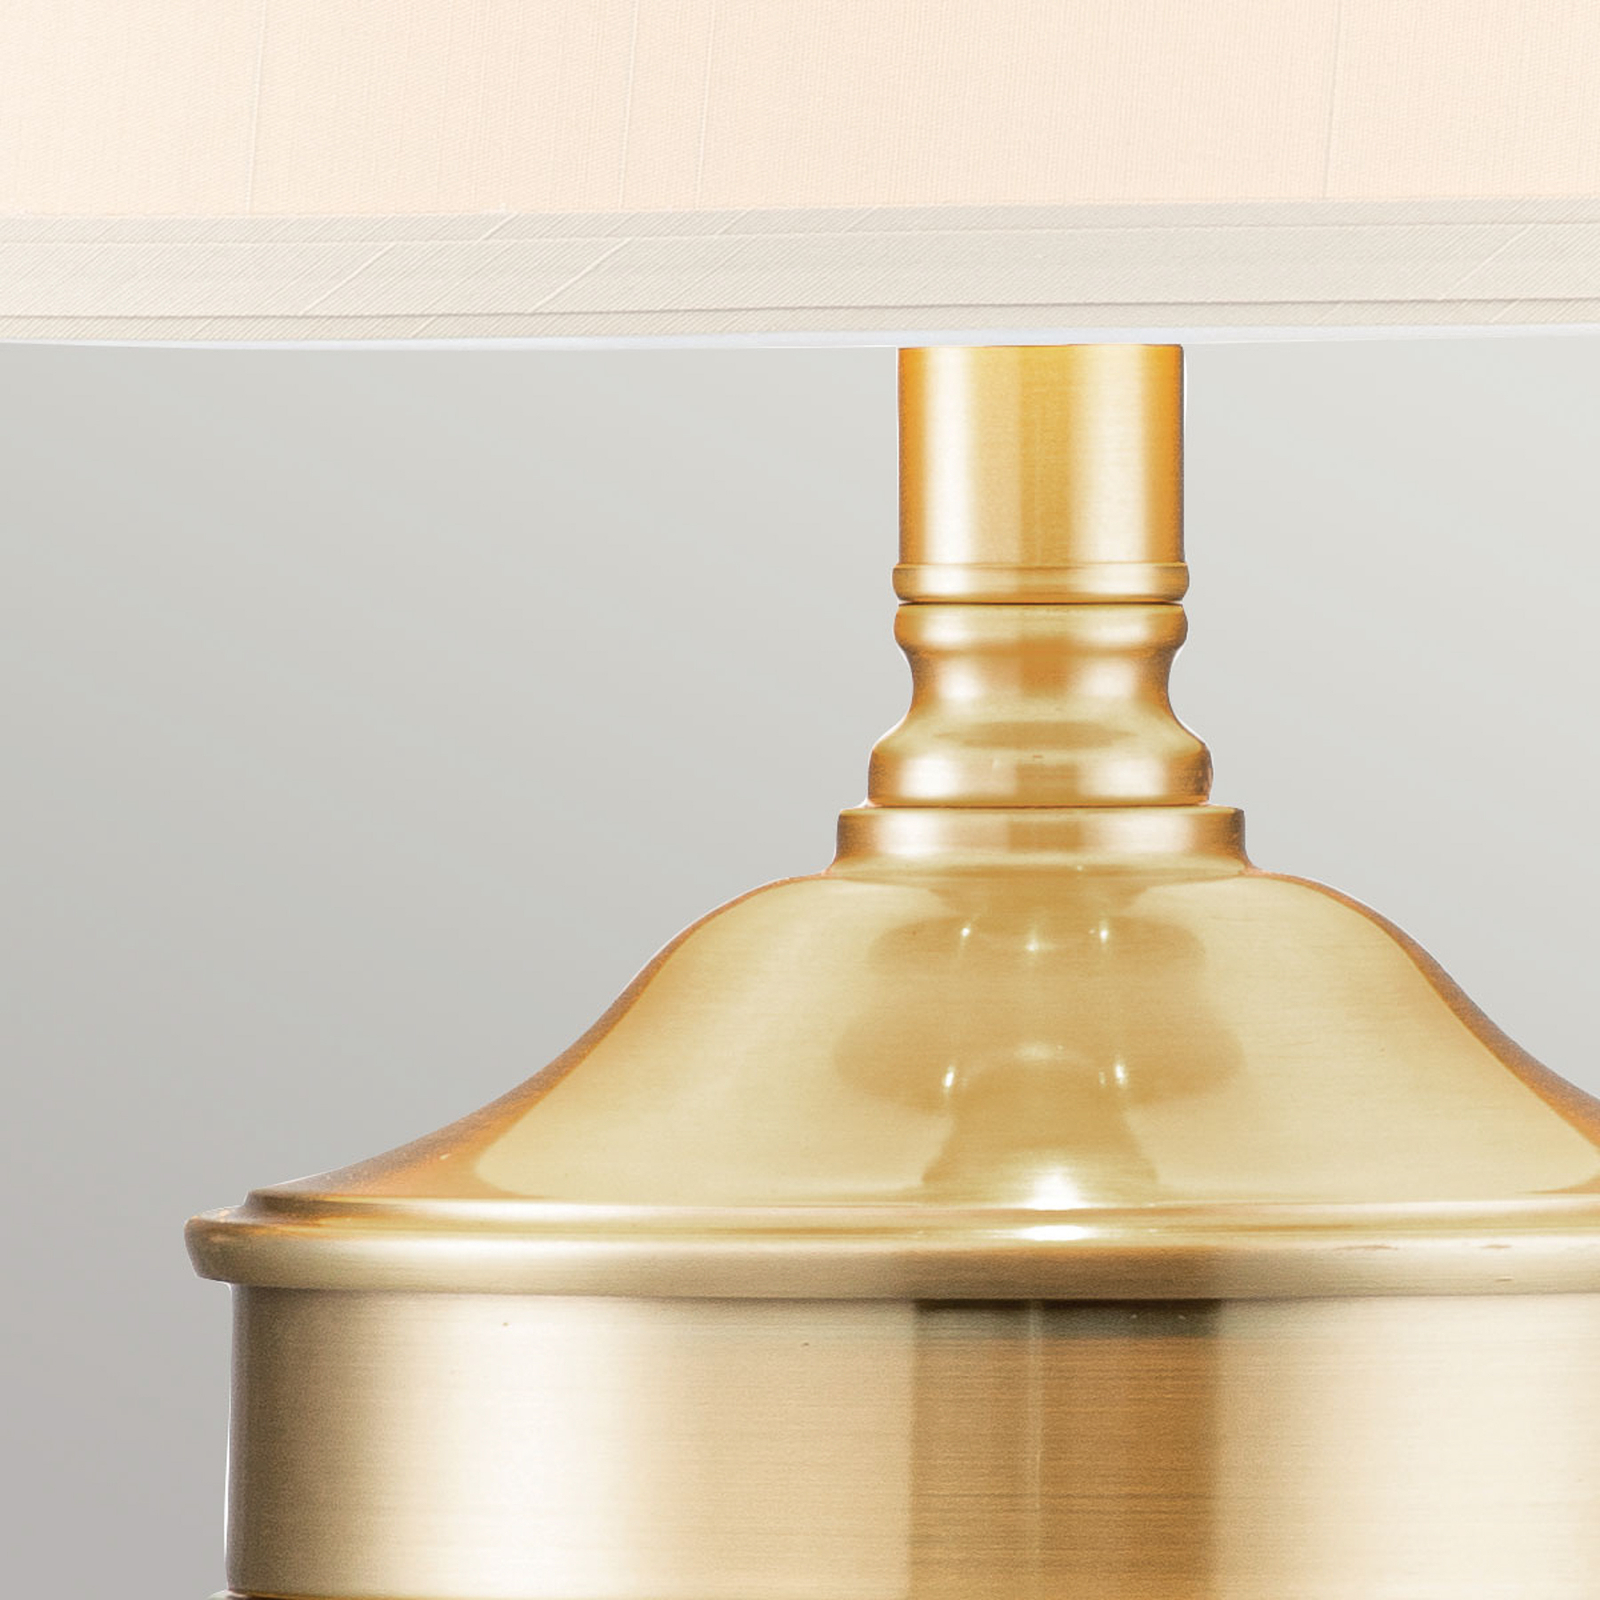 Dennison 1 fabric table lamp, brushed brass